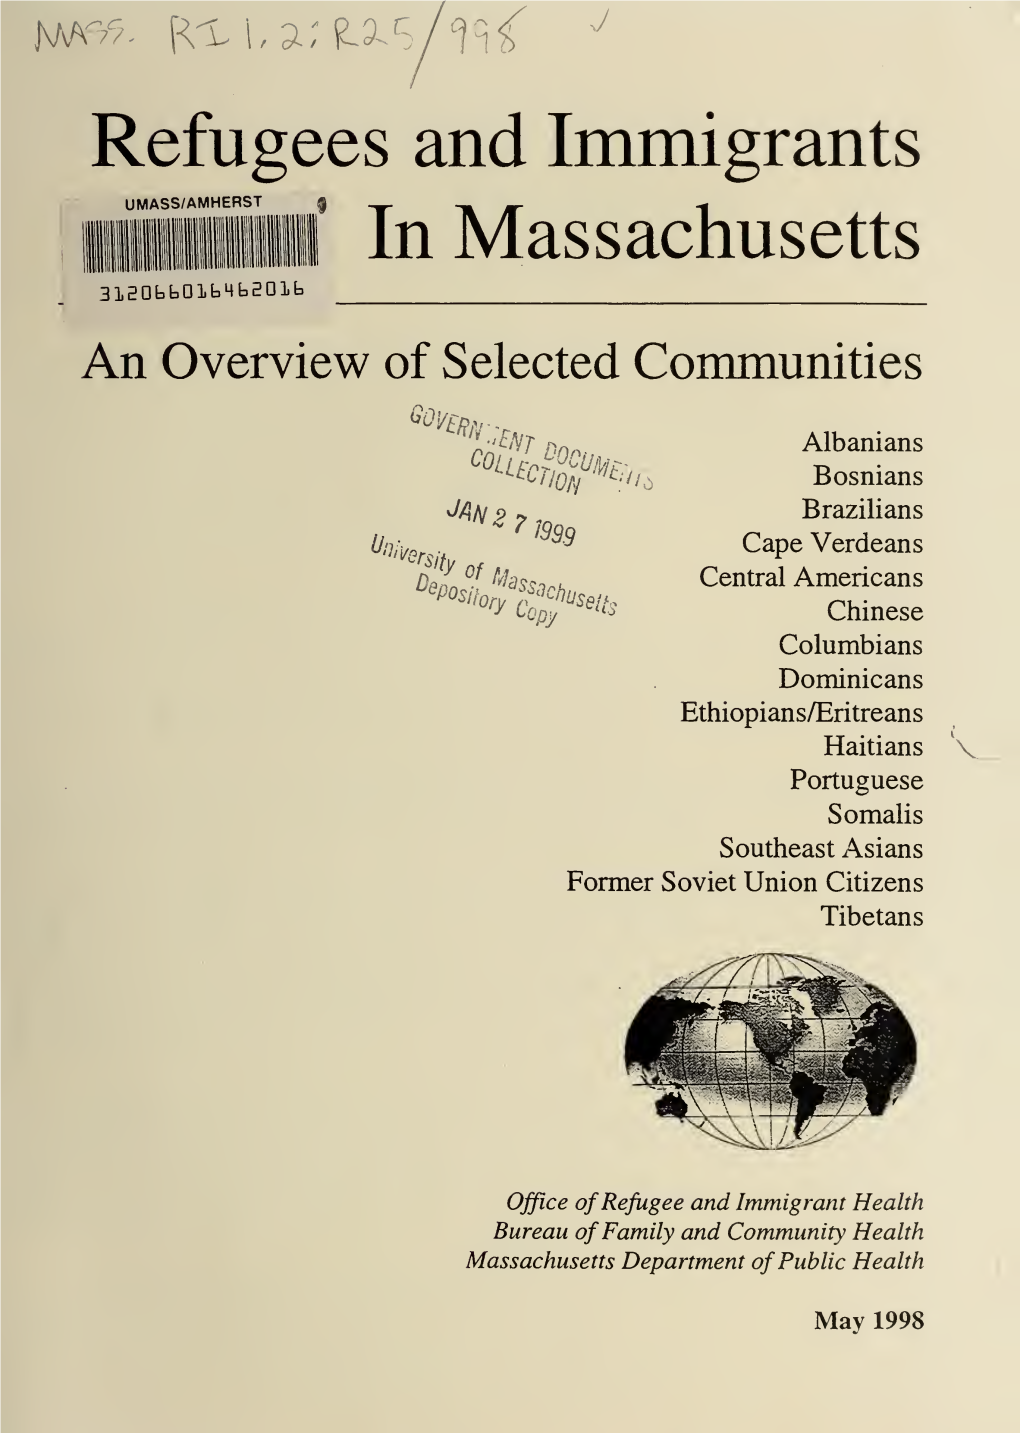 Refugees and Immigrants in Massachusetts 1998